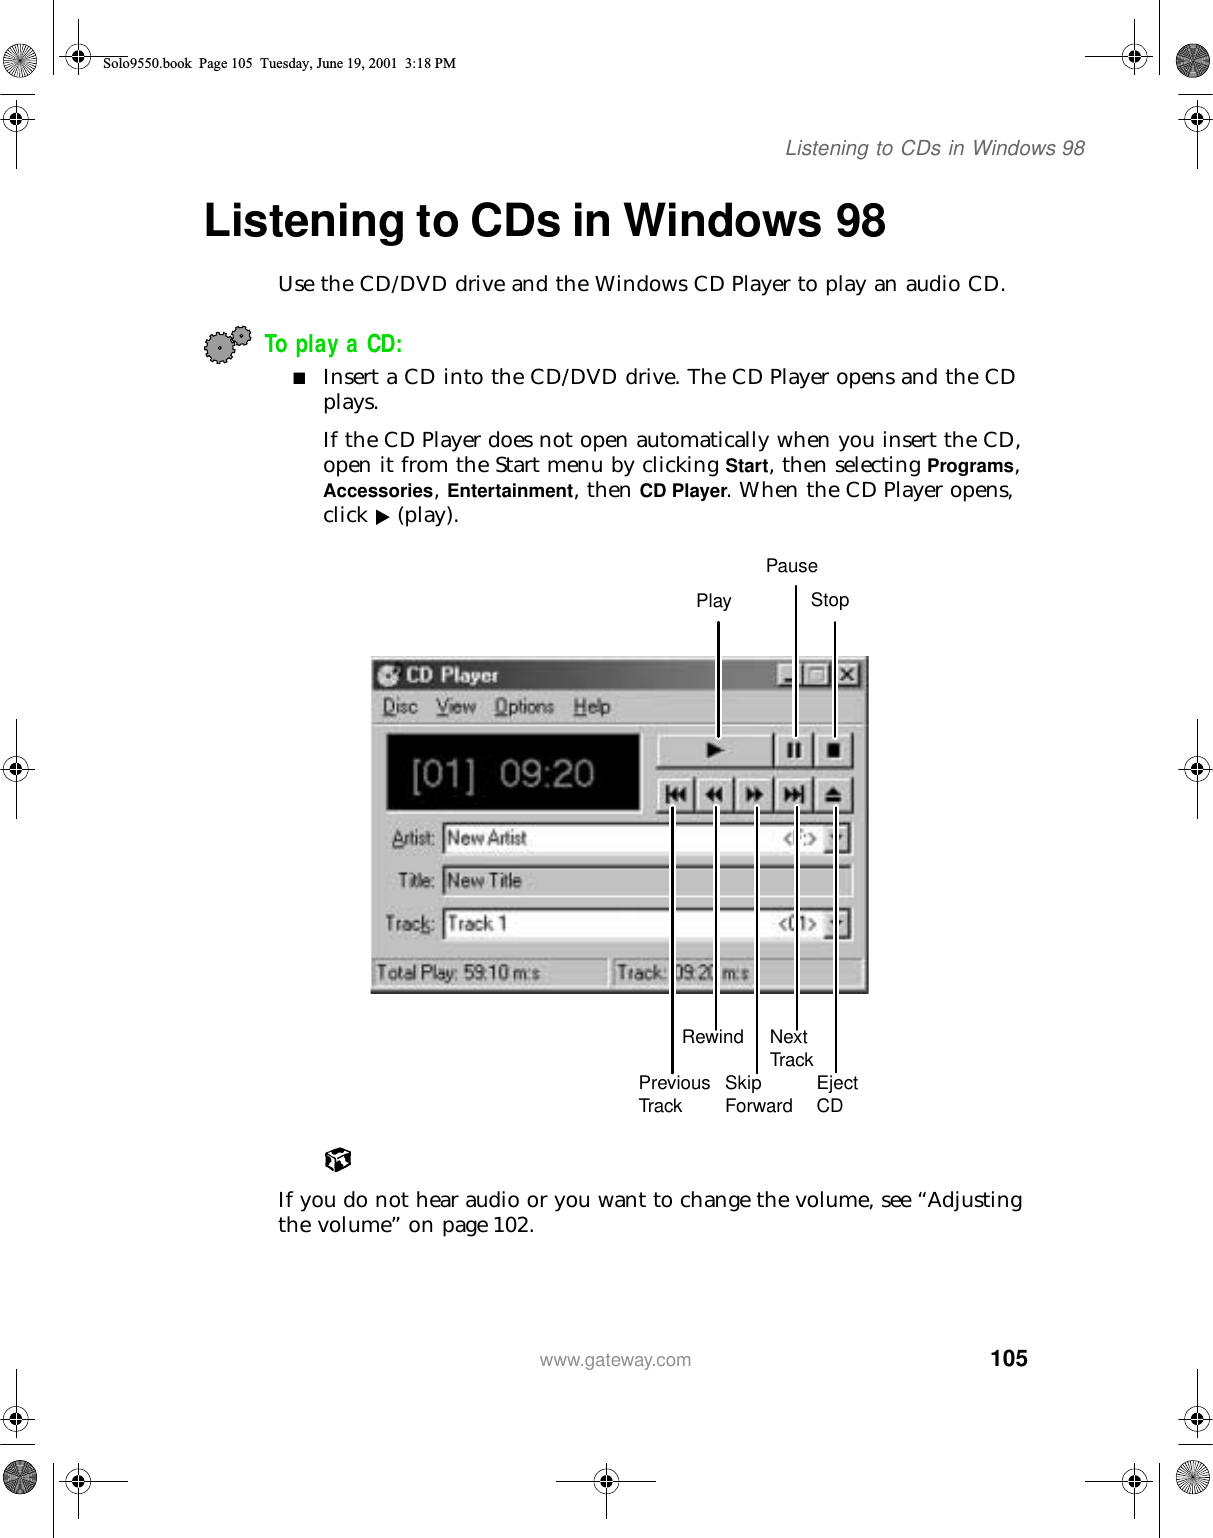 105Listening to CDs in Windows 98www.gateway.comListening to CDs in Windows 98Use the CD/DVD drive and the Windows CD Player to play an audio CD.To play a CD:■Insert a CD into the CD/DVD drive. The CD Player opens and the CD plays.If the CD Player does not open automatically when you insert the CD, open it from the Start menu by clicking Start, then selecting Programs, Accessories, Entertainment, then CD Player. When the CD Player opens, click  (play).If you do not hear audio or you want to change the volume, see “Adjusting the volume” on page 102.PlayPauseStopPrevious TrackRewindSkip Forward Eject CDNext TrackSolo9550.book Page 105 Tuesday, June 19, 2001 3:18 PM